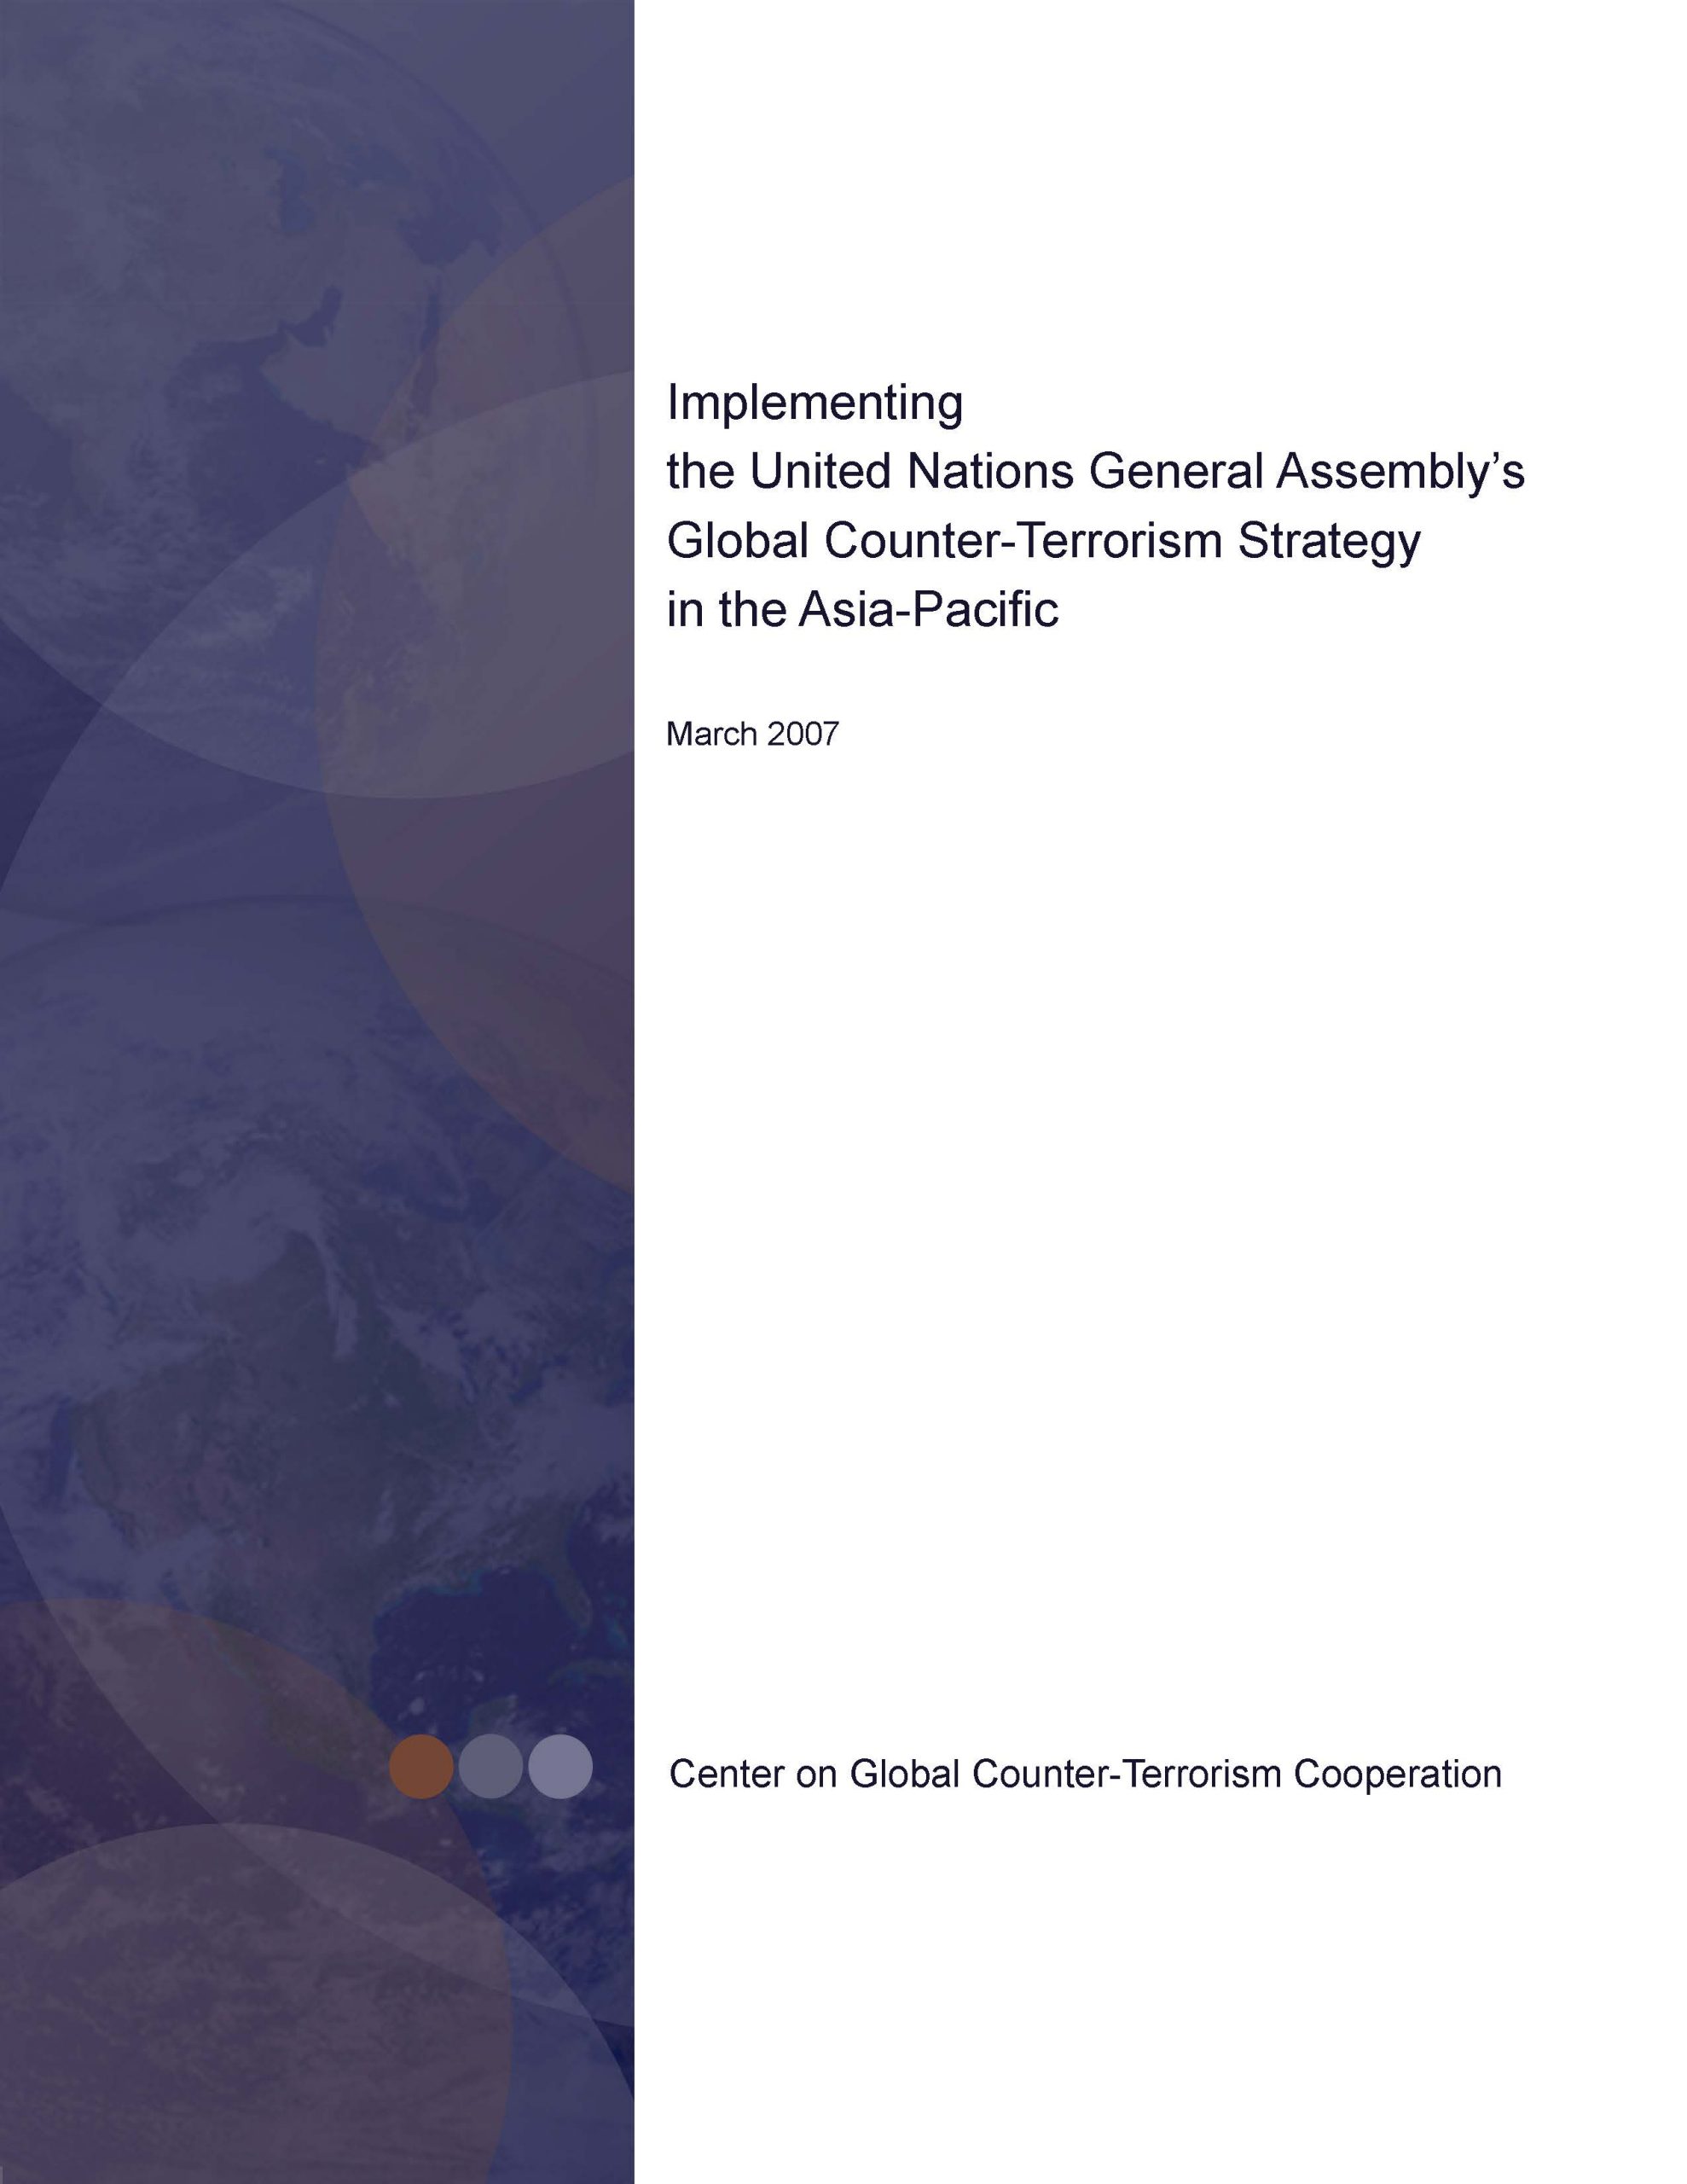 Implementing the United Nations General Assembly’s Global Counter-Terrorism Strategy in the Asia-Pacific